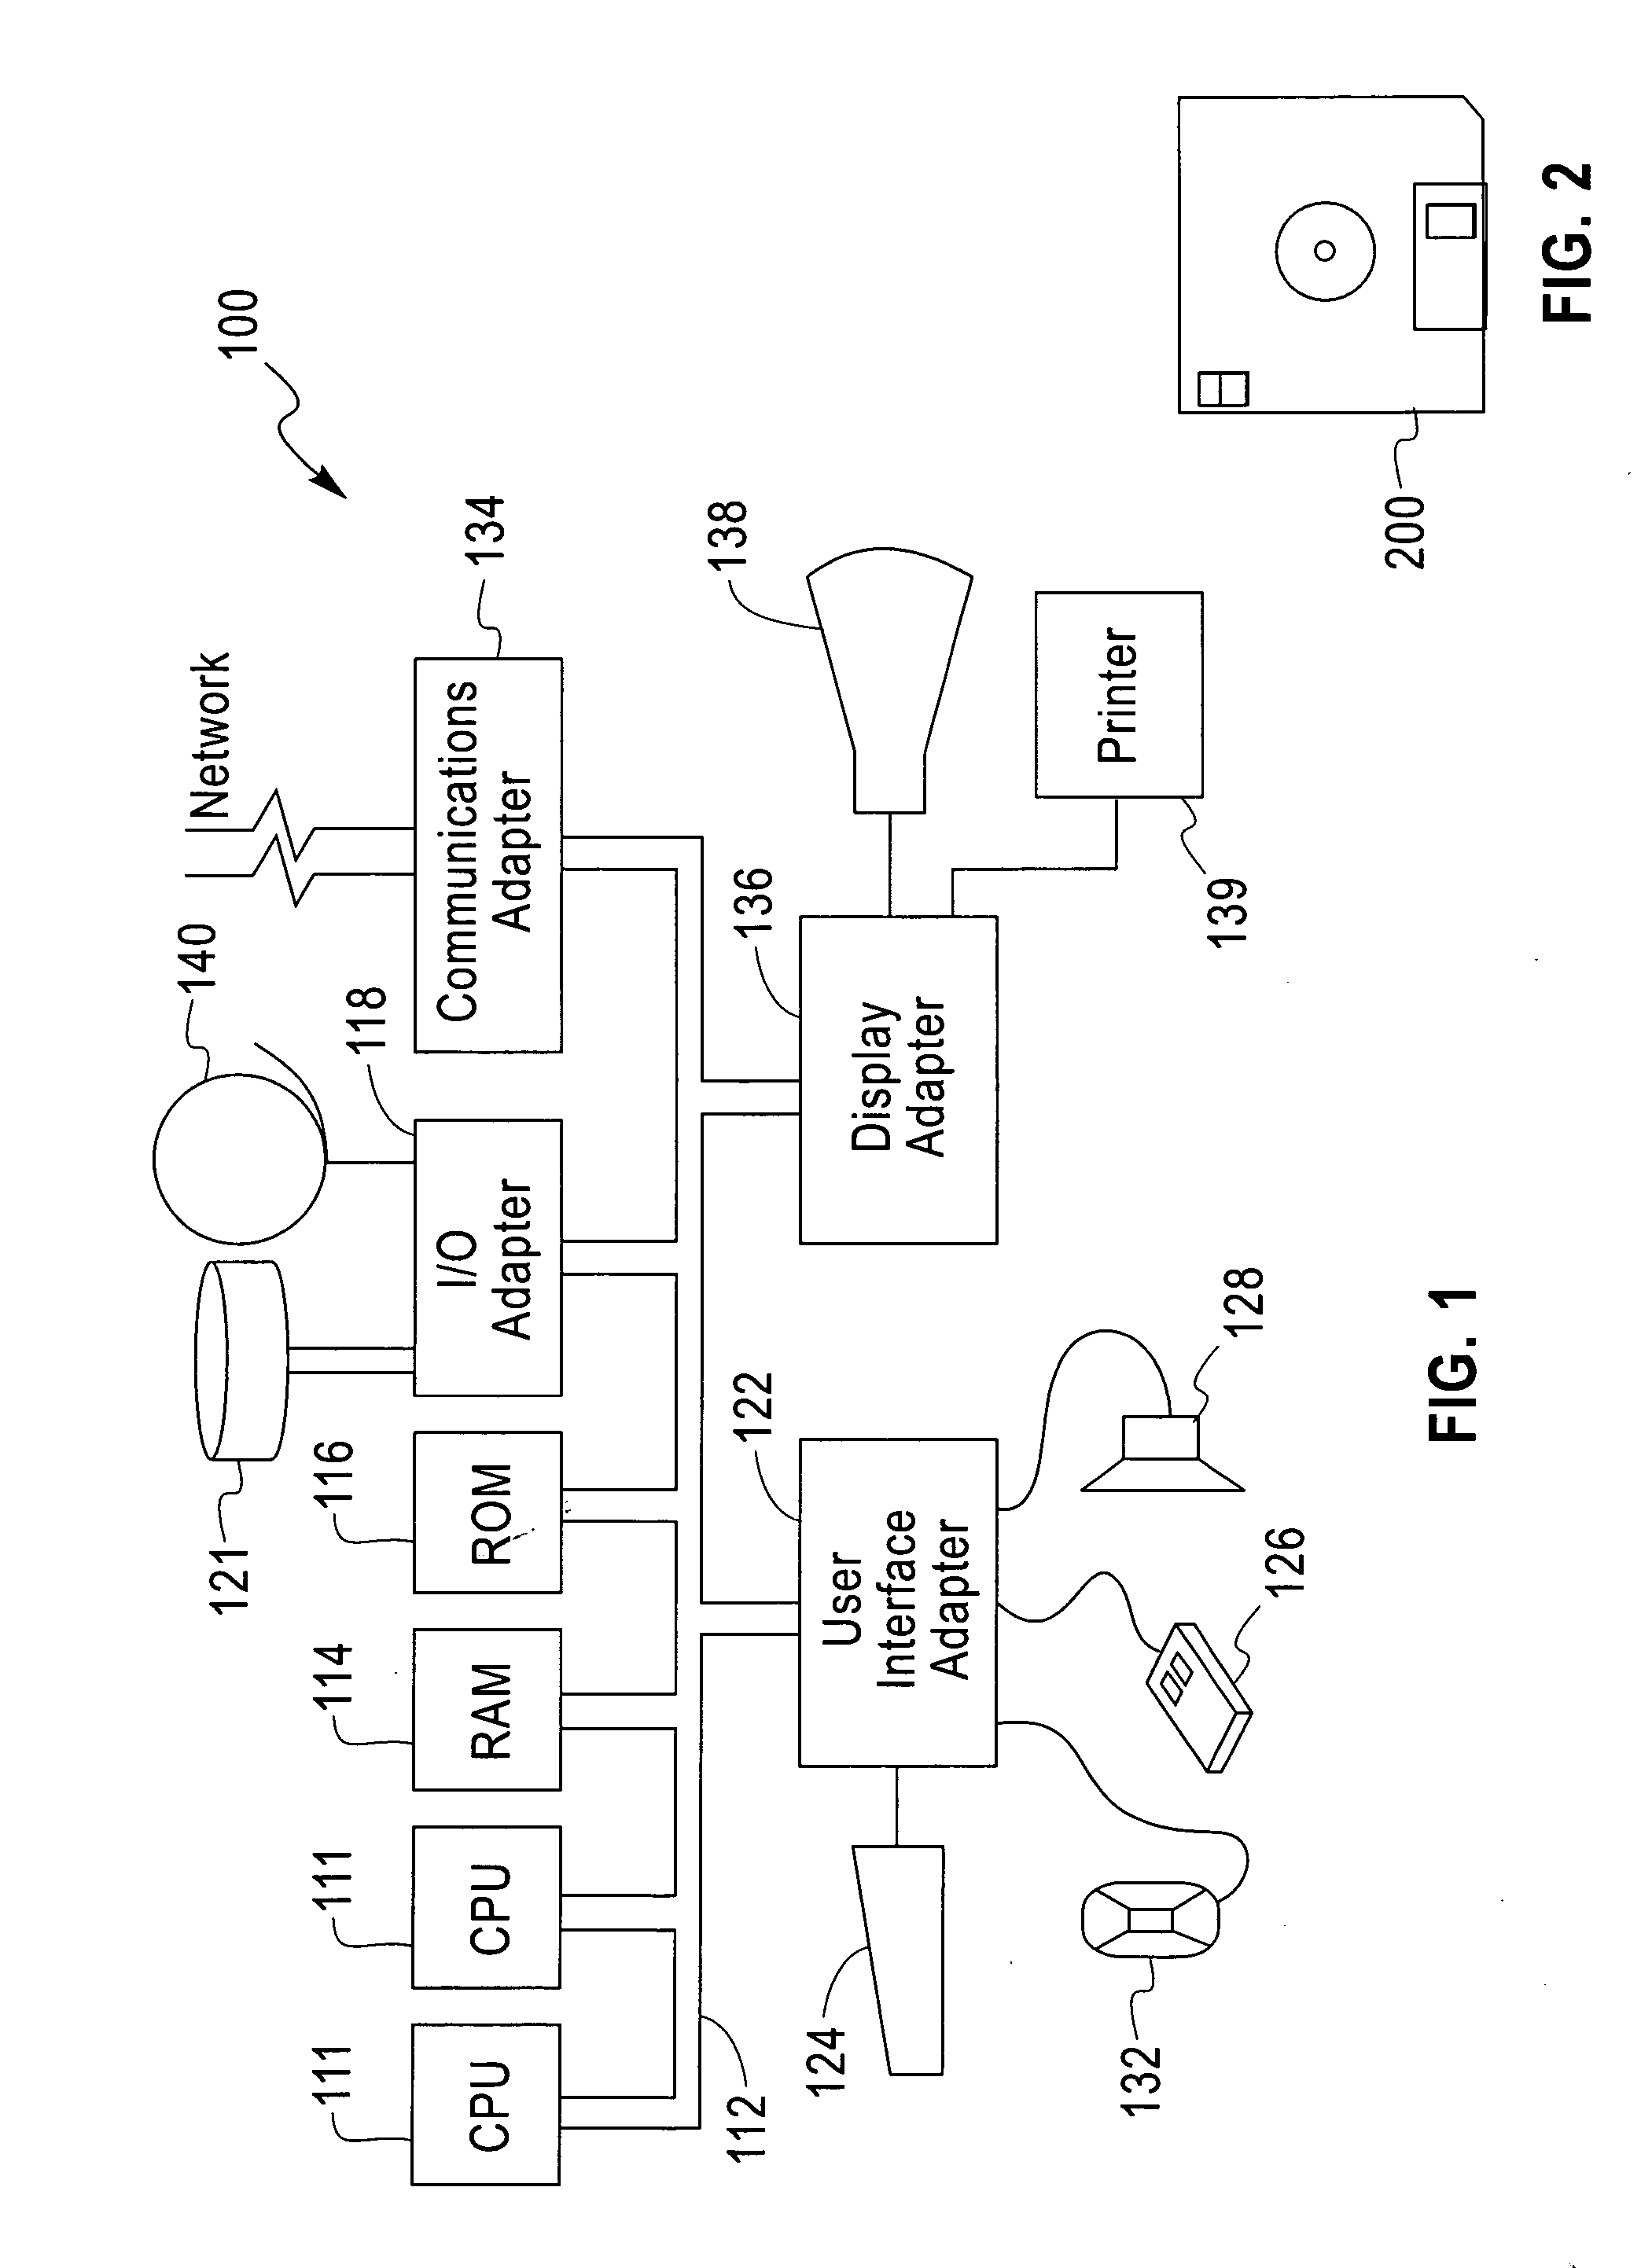 System and method for generating test cases